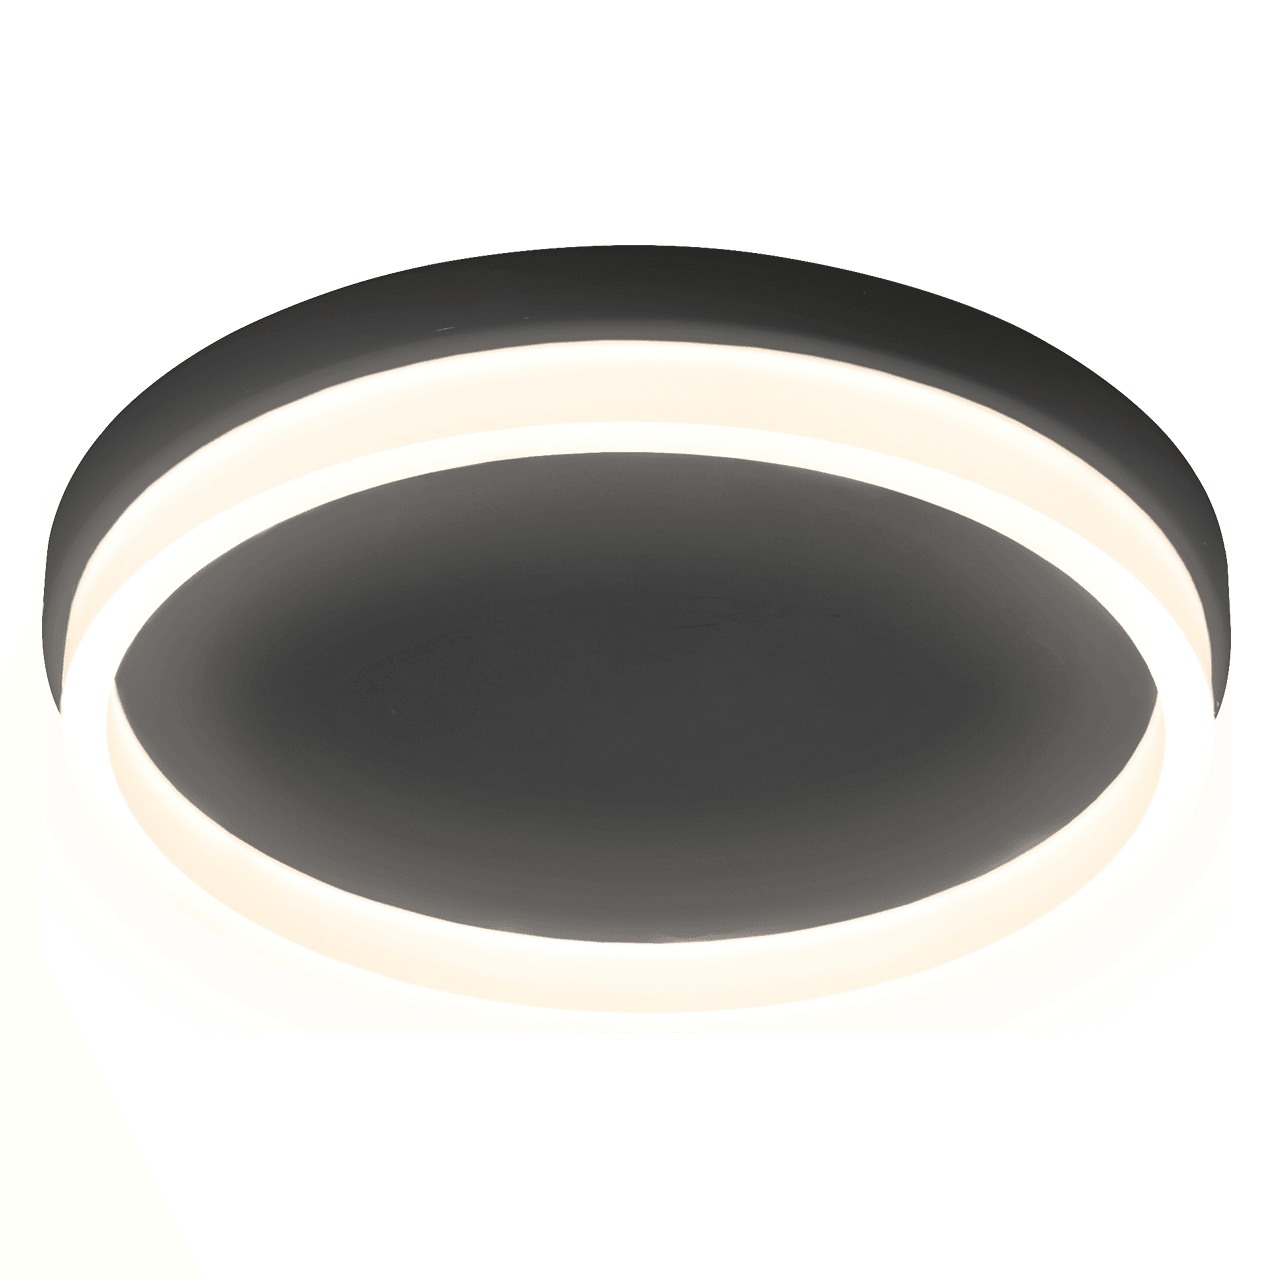 Pageone - Anello (L) 18.5"s. Ceiling. Flush Mount - Hbdepot